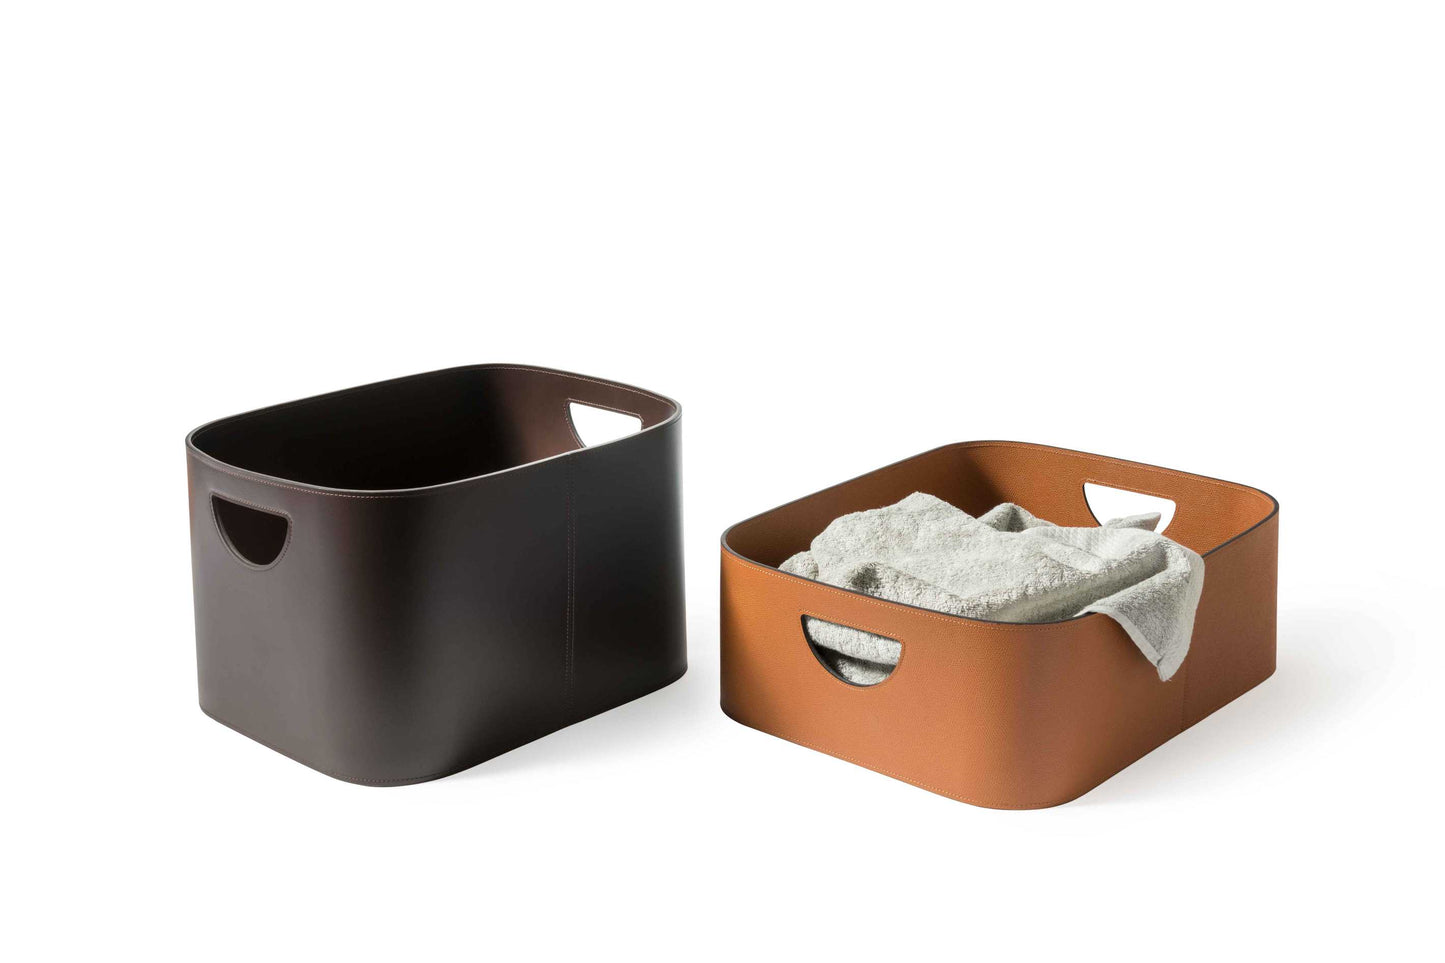 Rio Regenerated Leather Laundry & Storage Box | Made with eco-friendly, washable, and resistant regenerated leather | Suitable for outdoor use | Discover it now at 2Jour Concierge, #1 luxury high-end gift & lifestyle shop